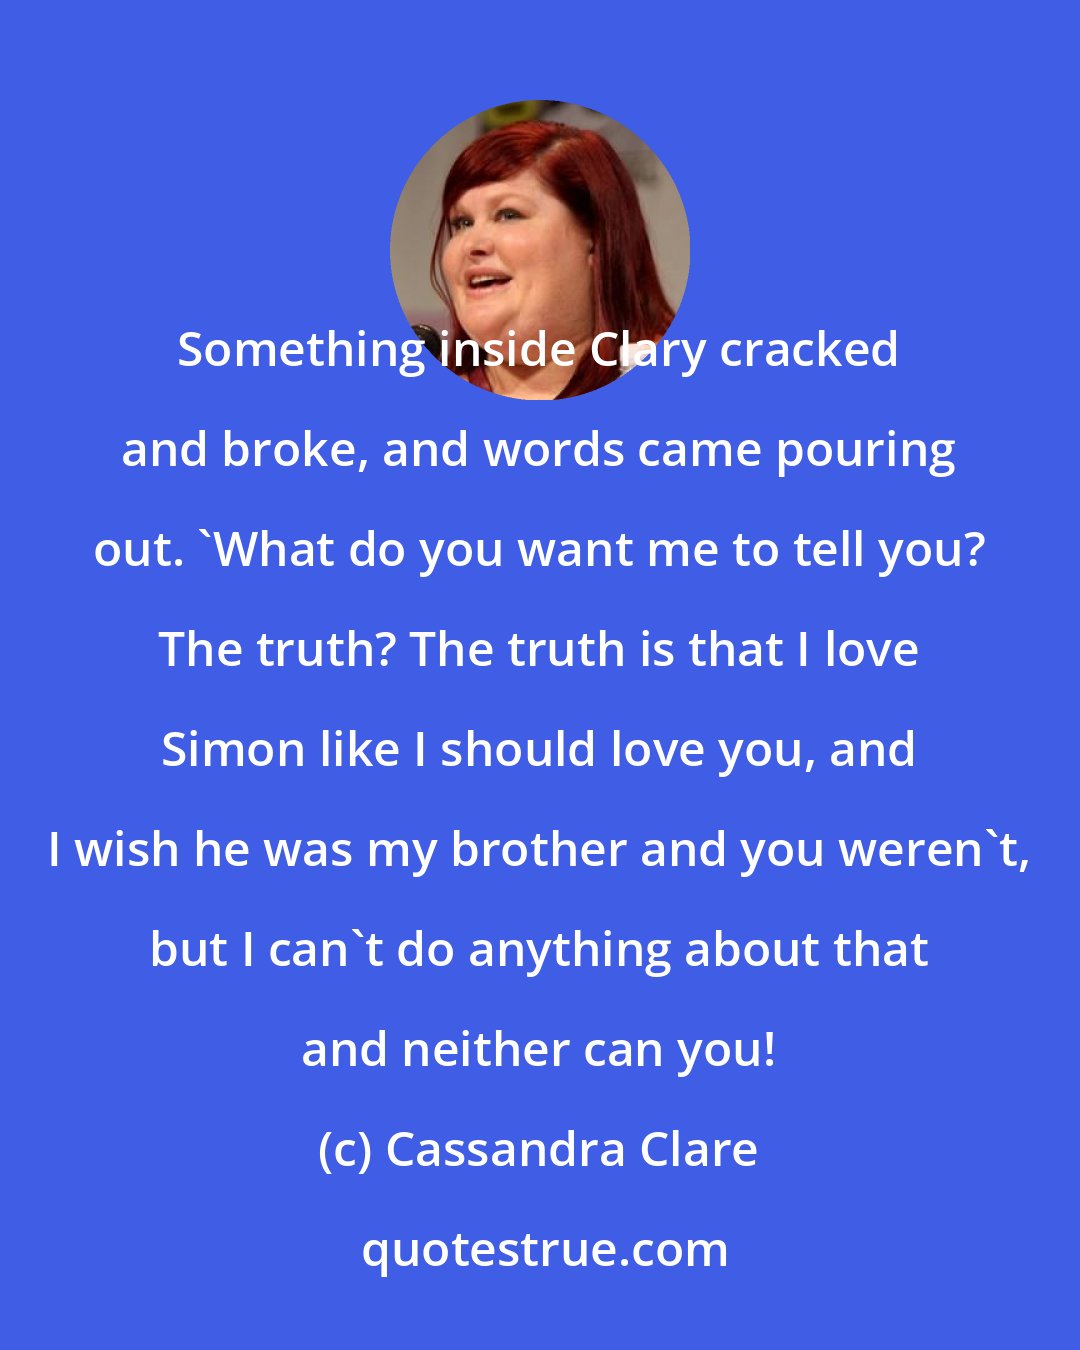 Cassandra Clare: Something inside Clary cracked and broke, and words came pouring out. 'What do you want me to tell you? The truth? The truth is that I love Simon like I should love you, and I wish he was my brother and you weren't, but I can't do anything about that and neither can you!